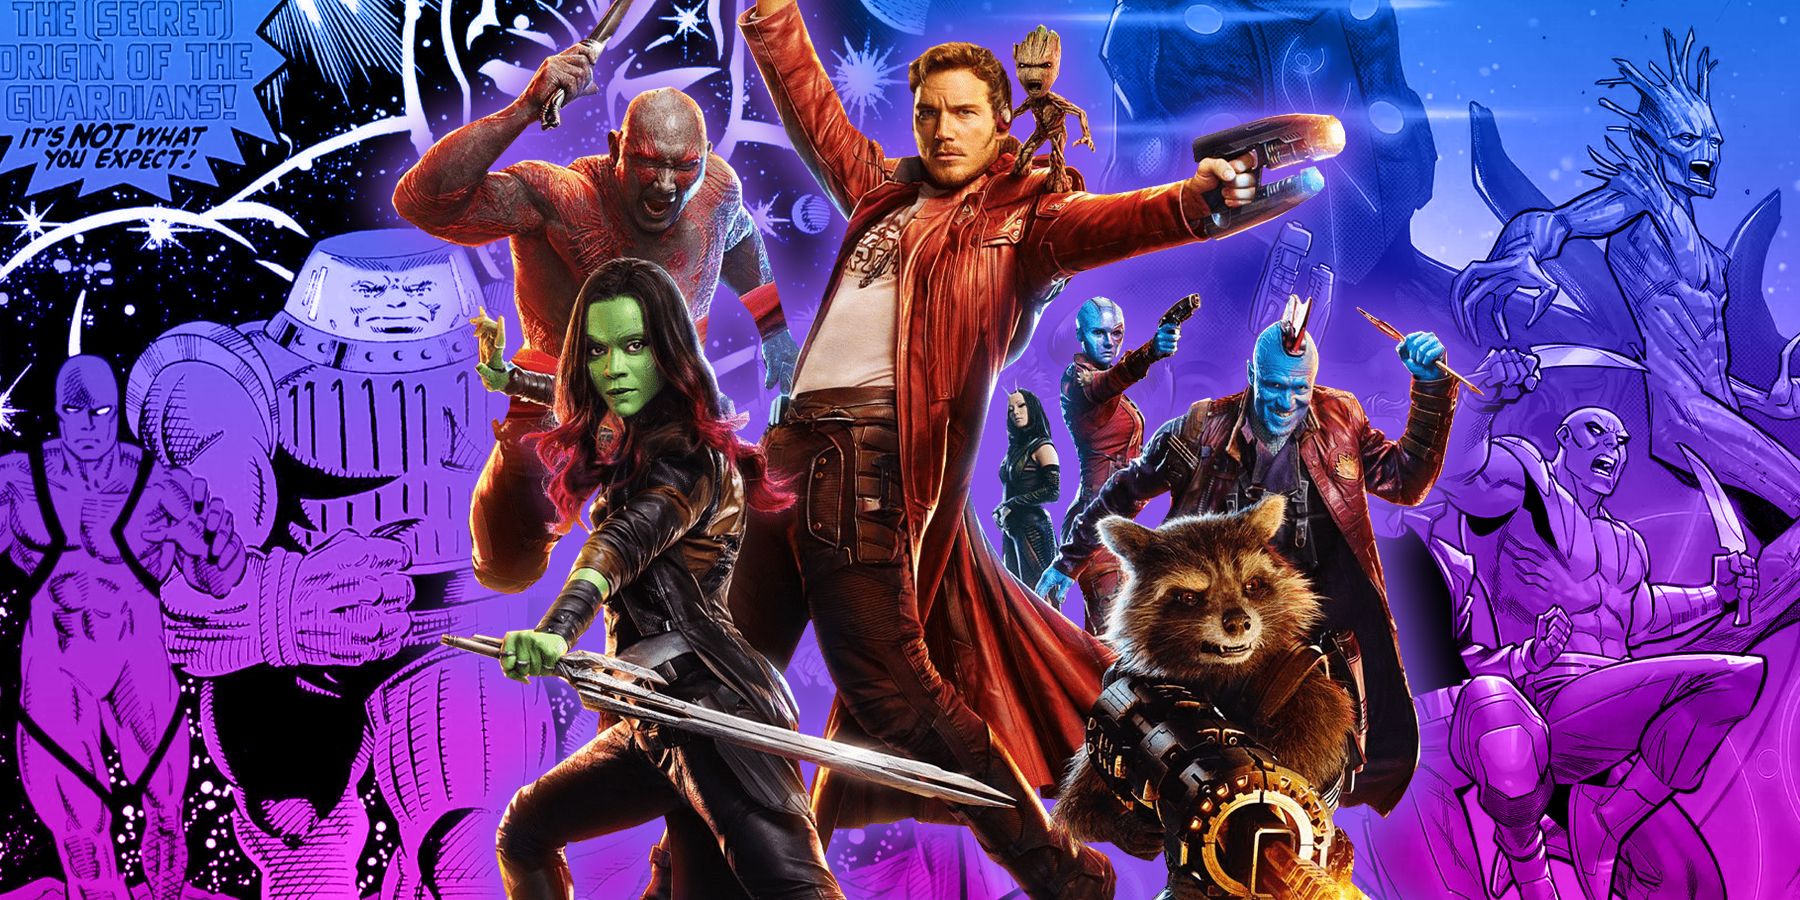 Star-Lord (Marvel Cinematic Universe), Heroes Wiki